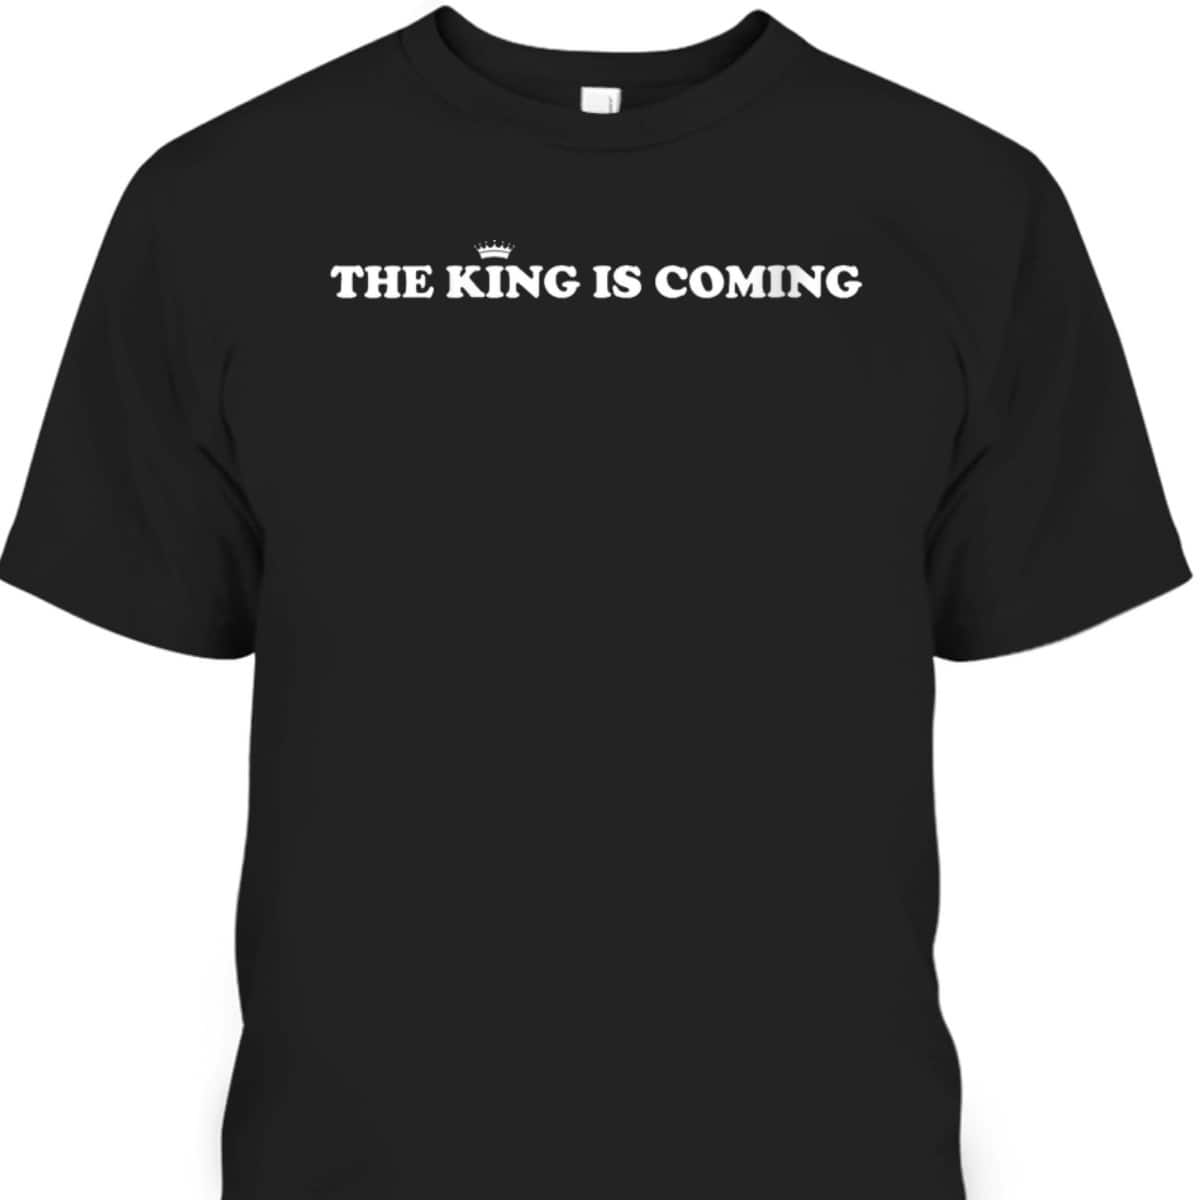 The King Is Coming T-Shirt Jesus Is King Christian Faith Gift